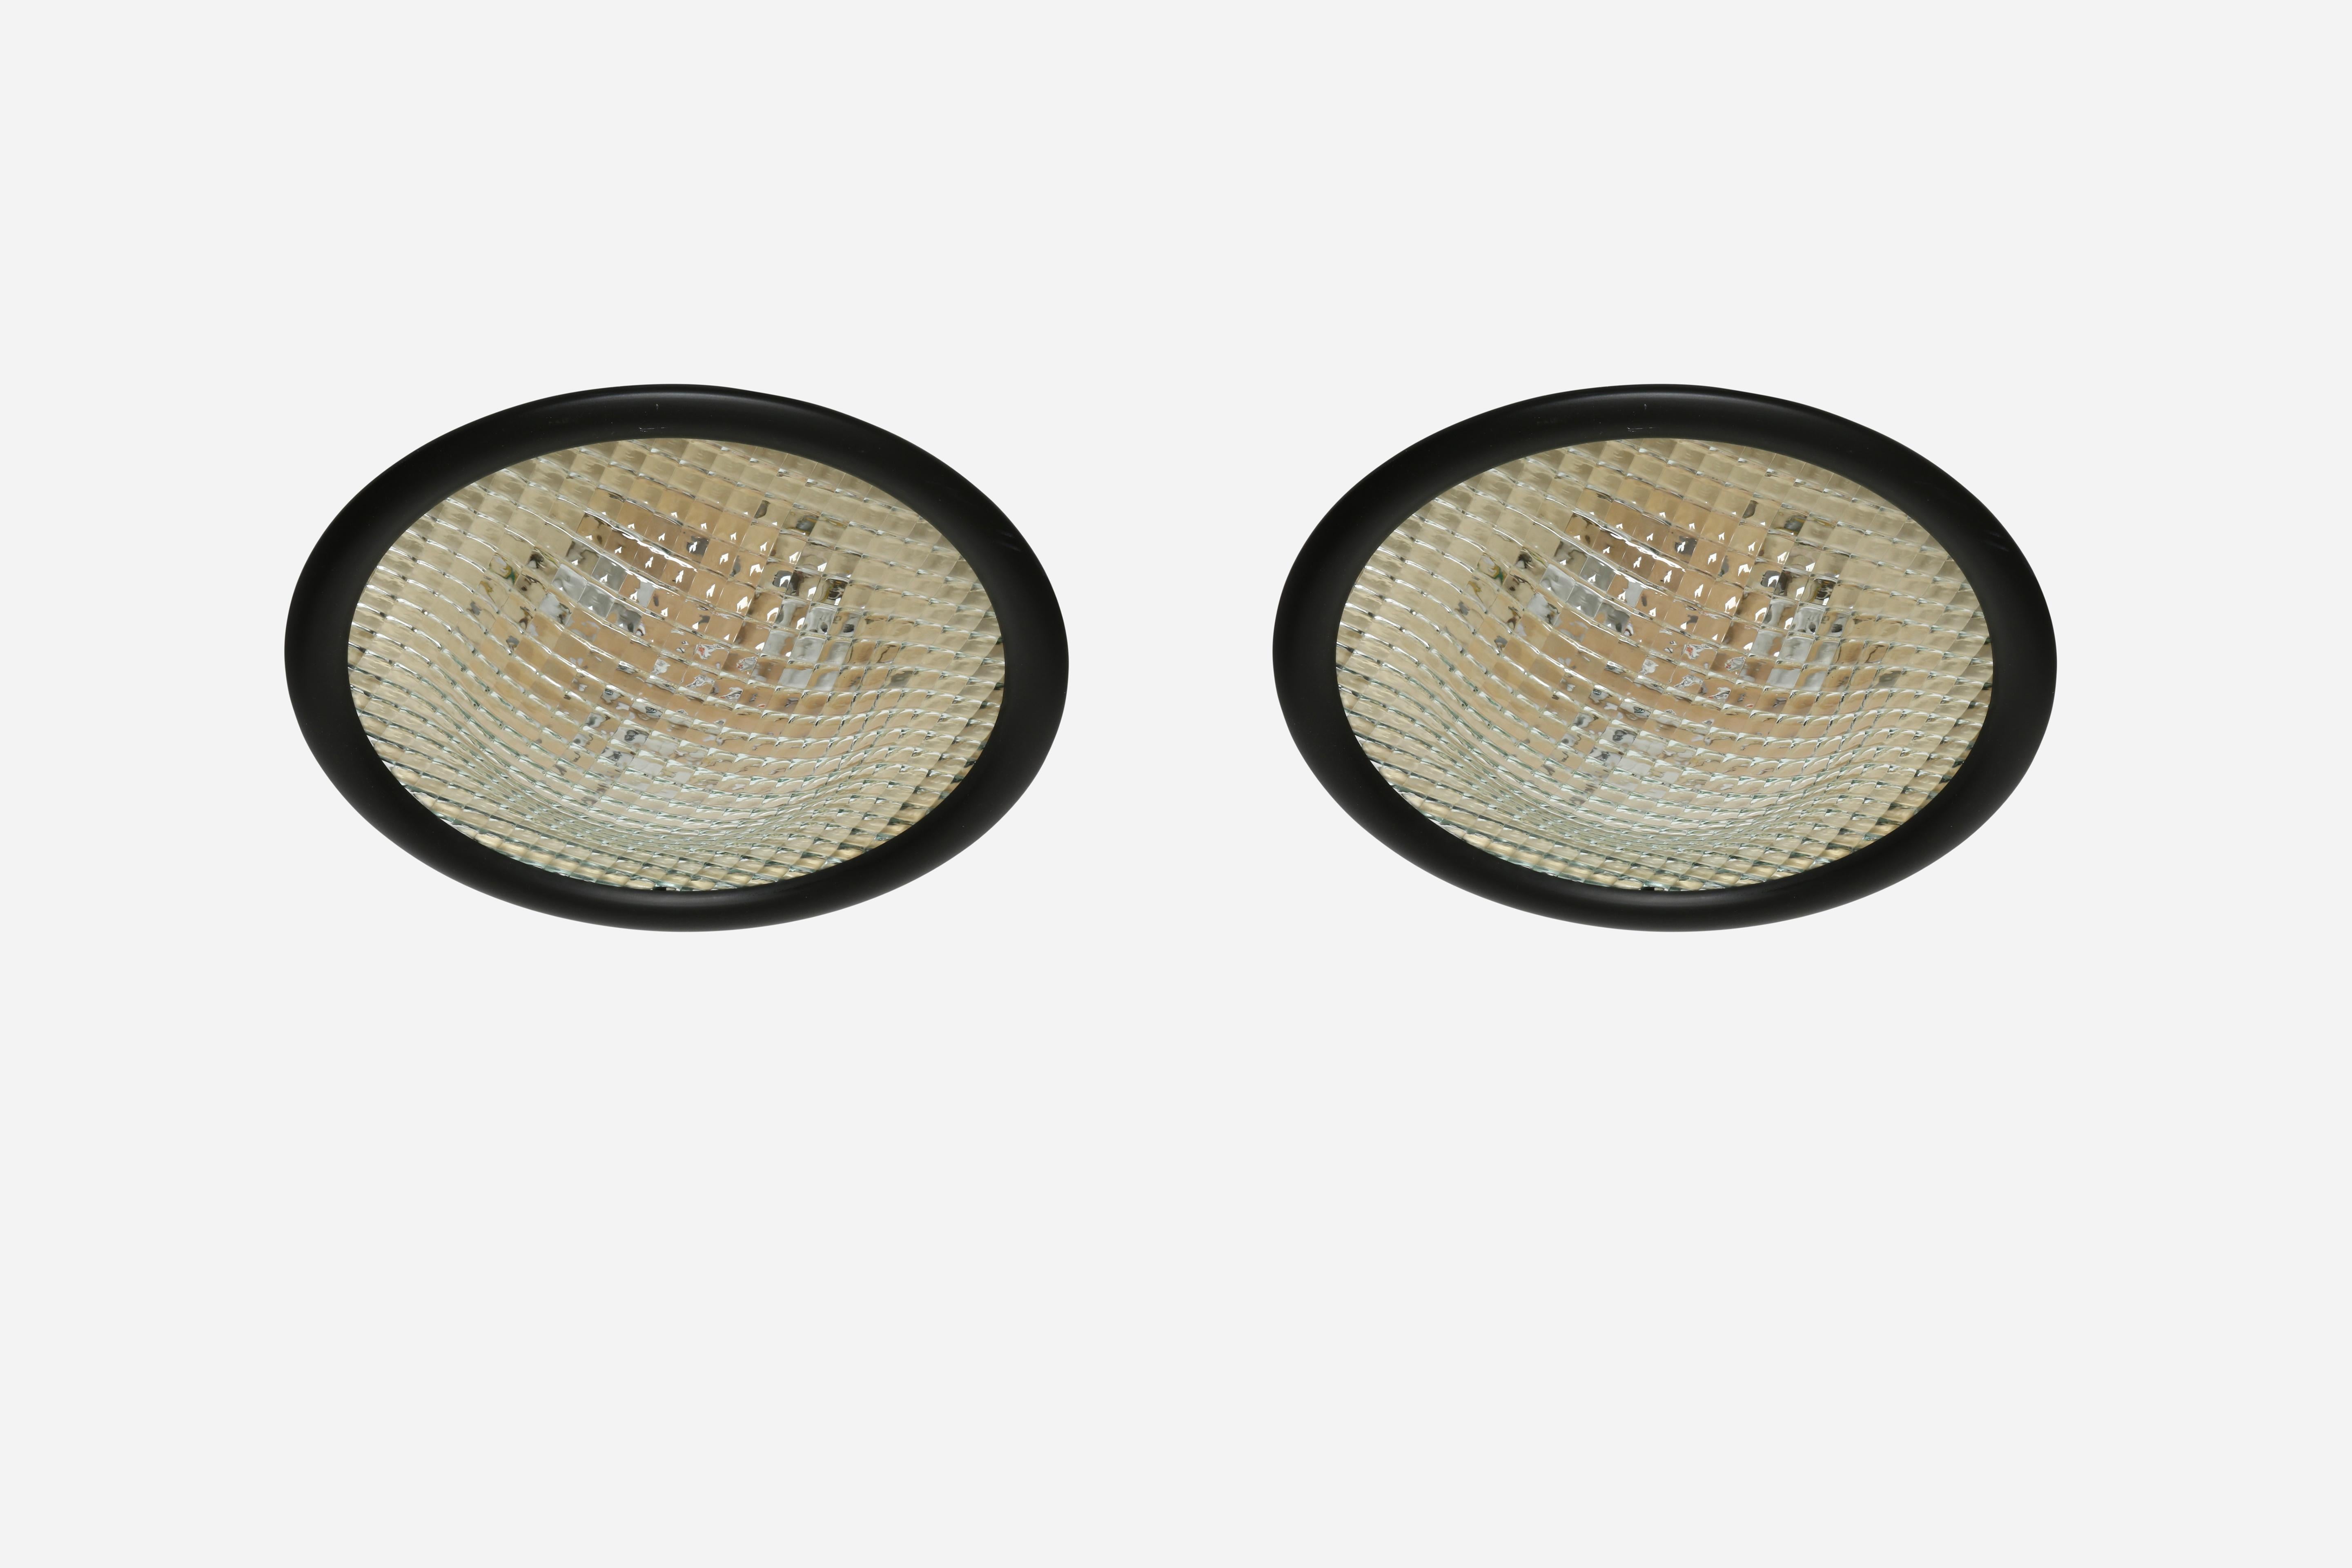 Stilnovo flush mount ceiling lights, Large.
Made in Italy in 1970s.
Rare pair in large size.
Concave prismatic glass, enameled metal.
Stilnovo label.
Complimentary US rewiring upon request.
Take 3 medium base bulbs each.
Priced and sold as a